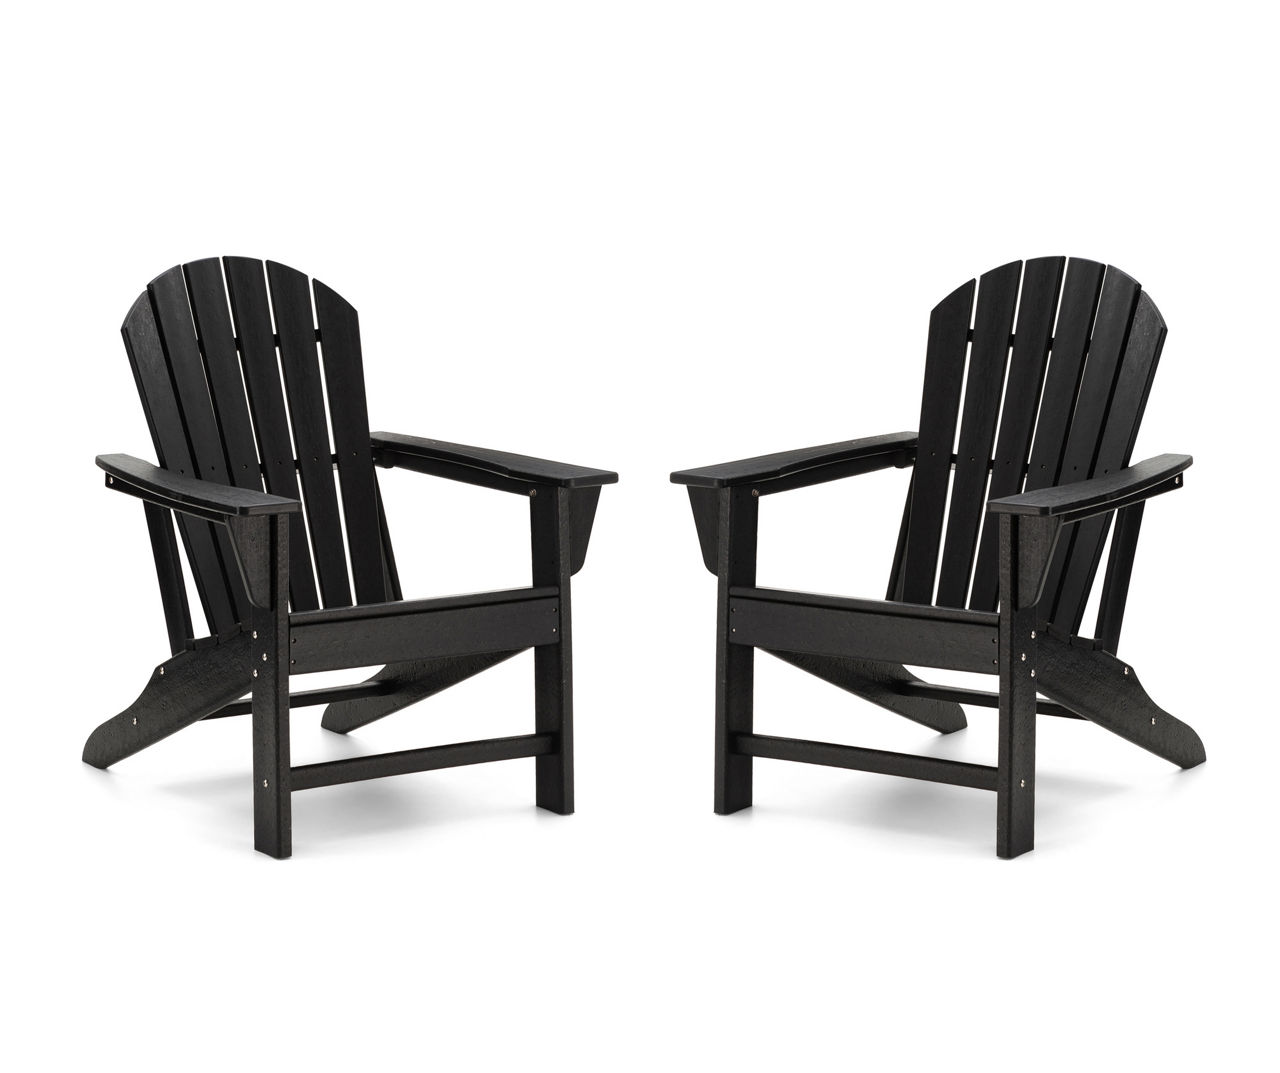 Black Adirondack HDPE Outdoor Chairs, 2-Pack